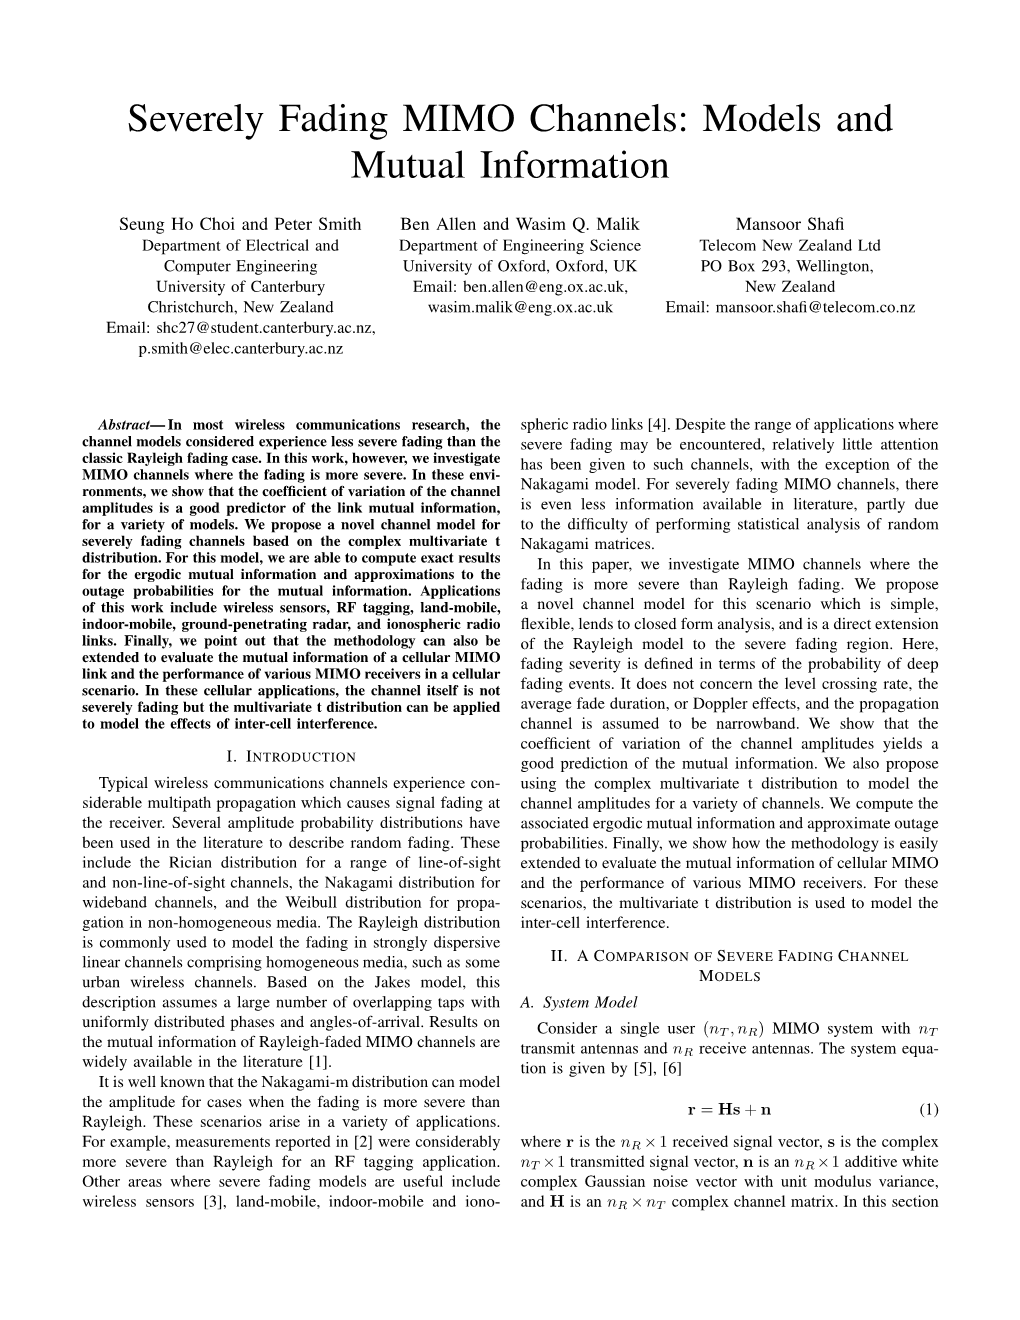 Severely Fading MIMO Channels: Models and Mutual Information